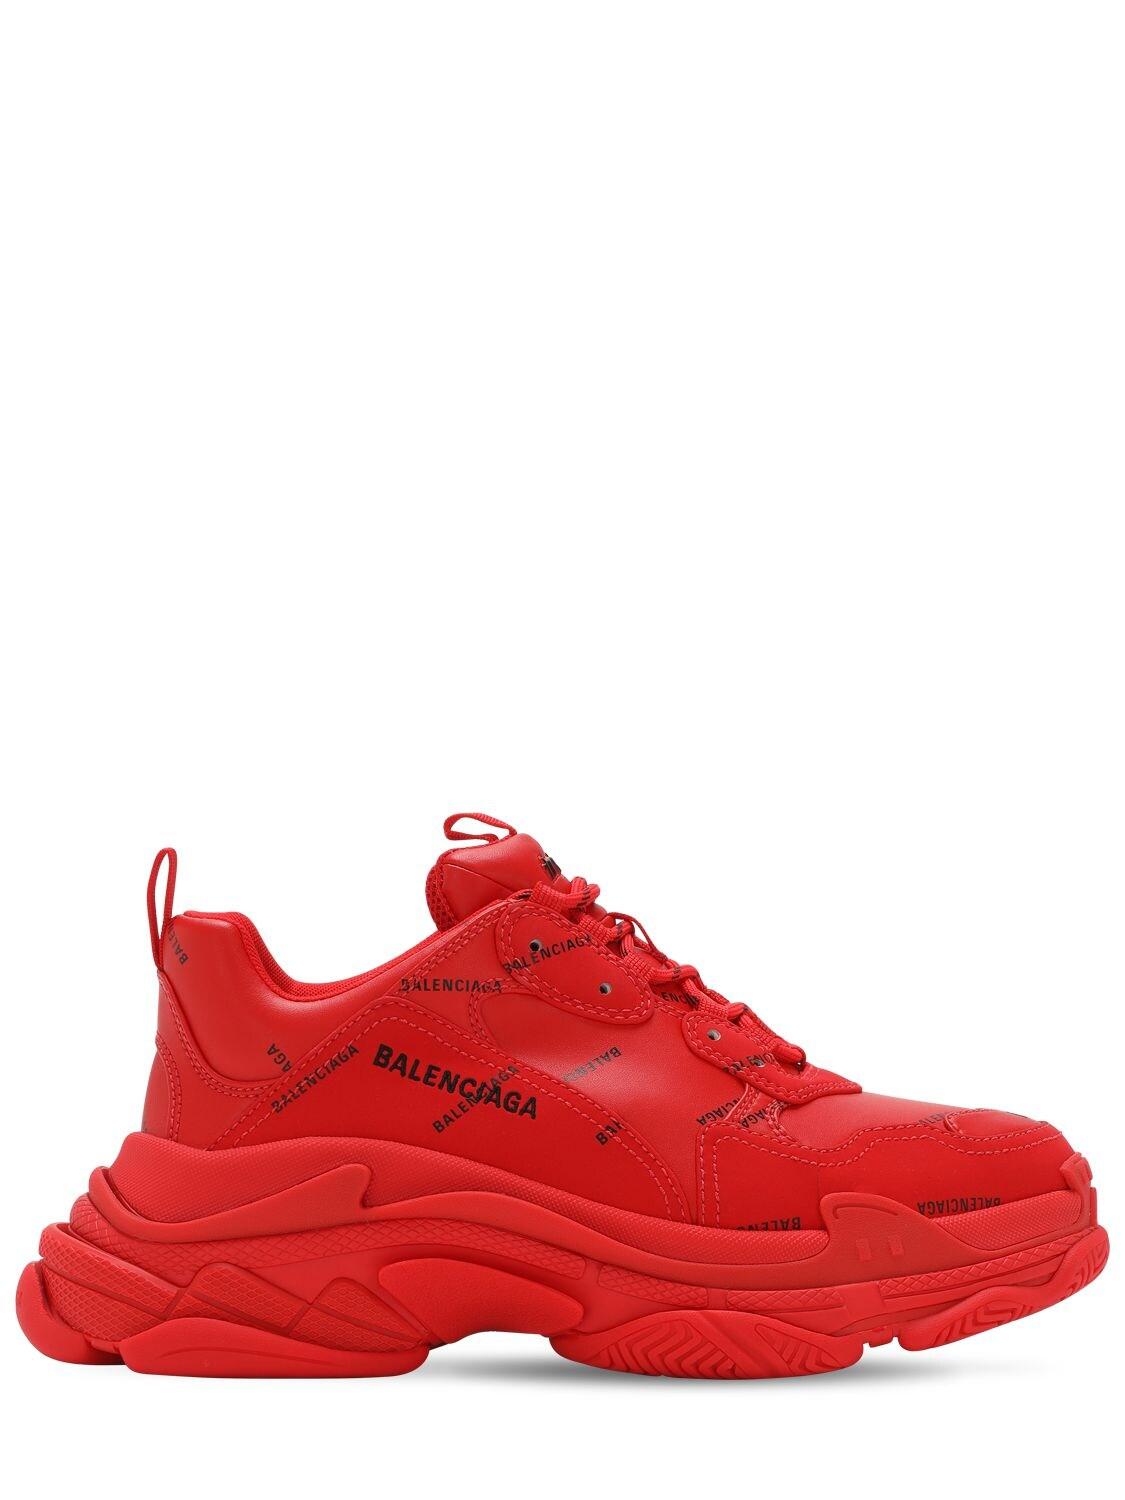 Balenciaga Synthetic Triple S Clear Sole Sneaker in Red/Black (Red) for Men  - Save 49% - Lyst